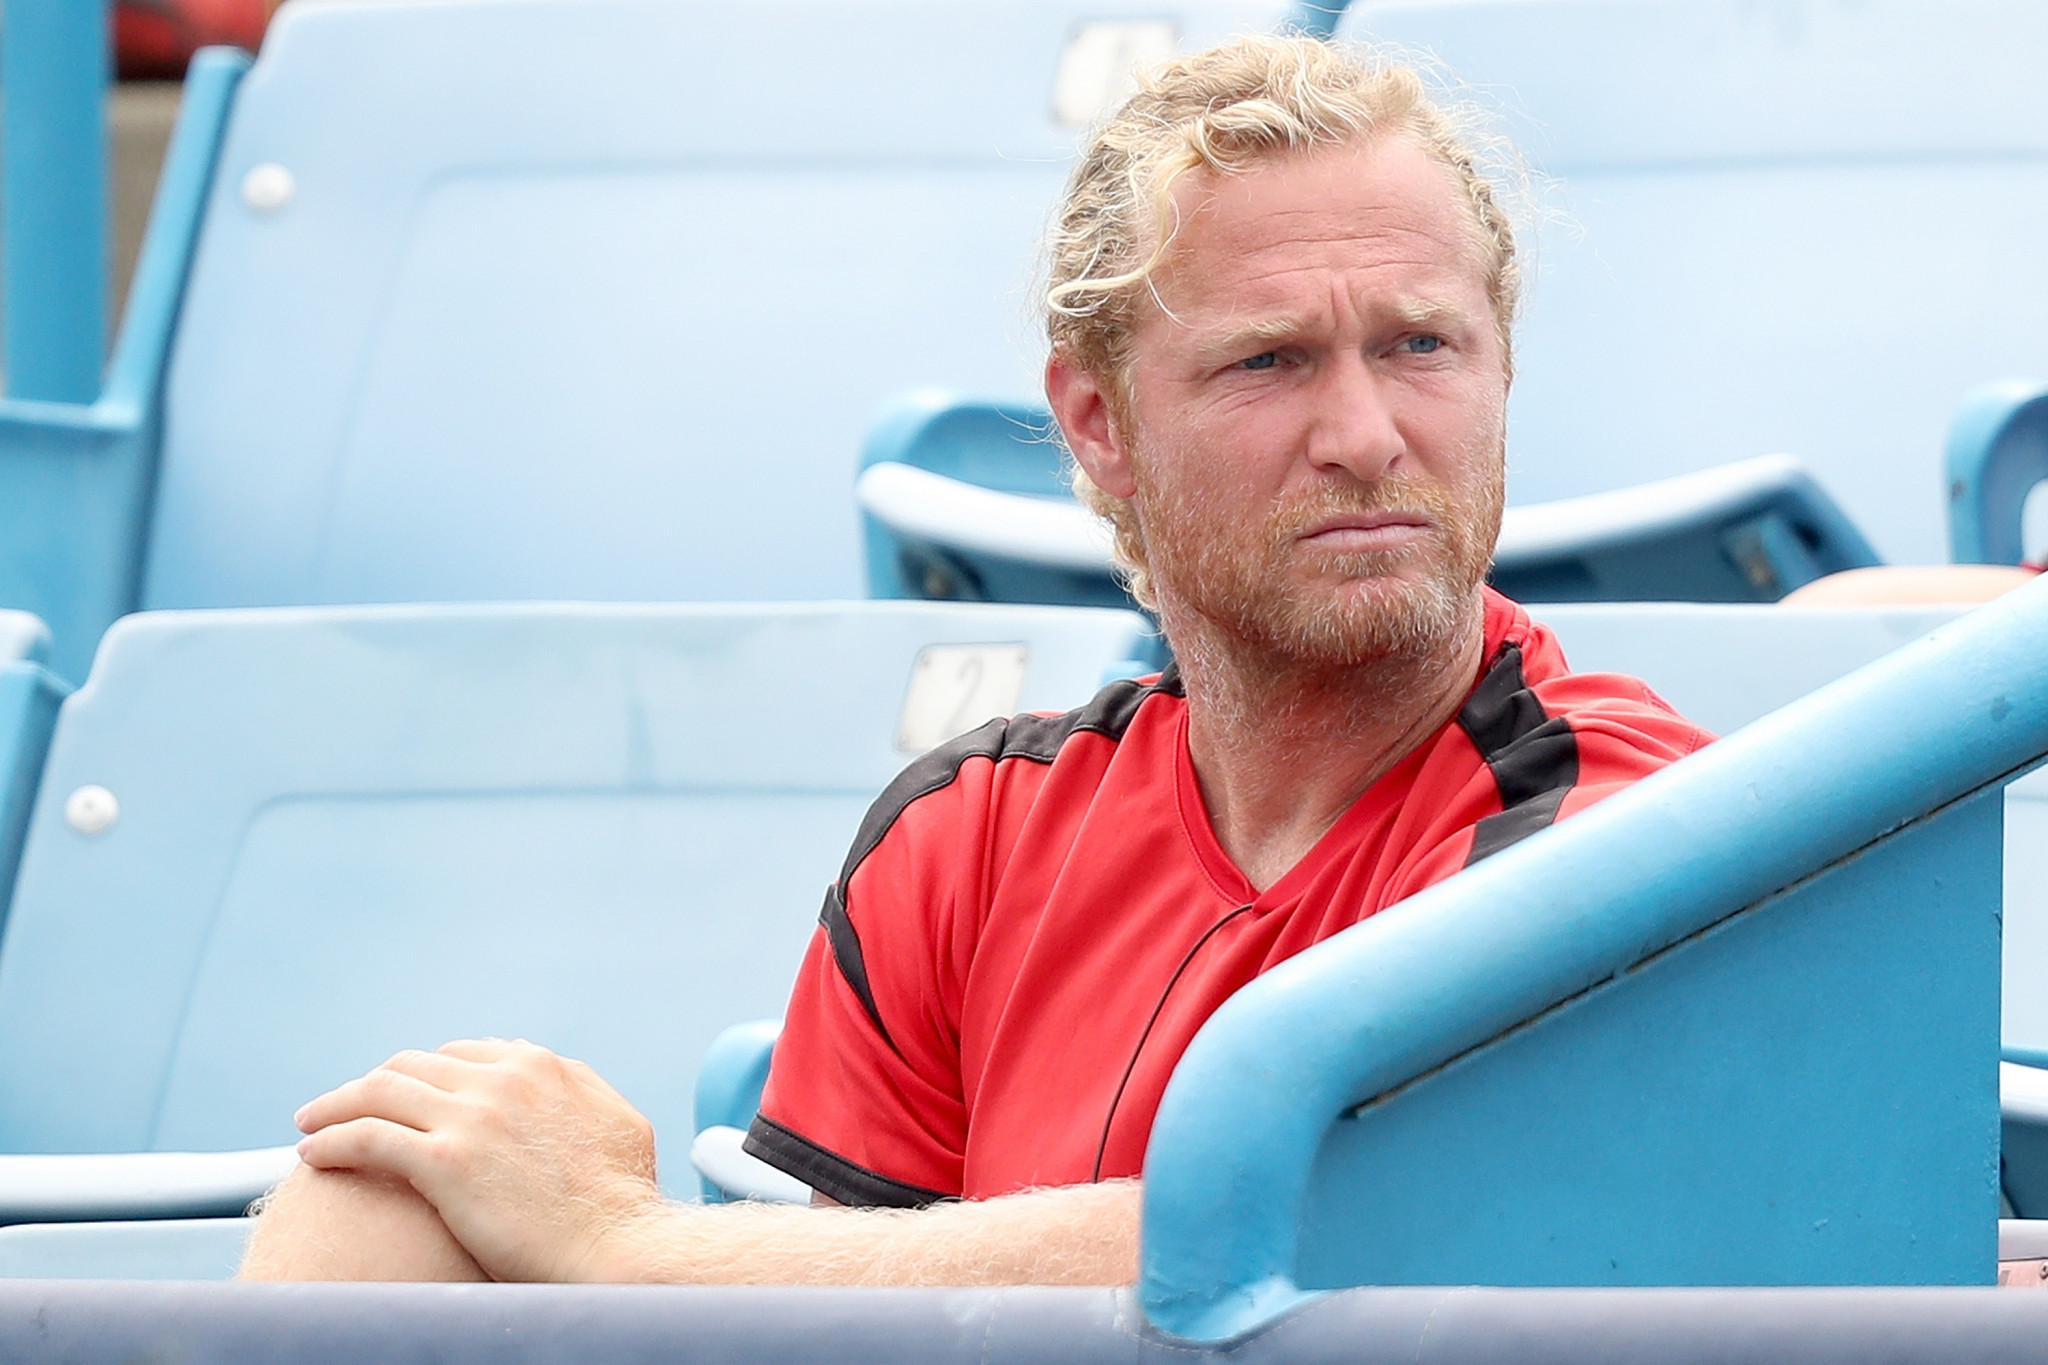 Russian coach Dmitry Tursunov split with Estonia's Dmitry Tursunov after the French Open ©Getty Images